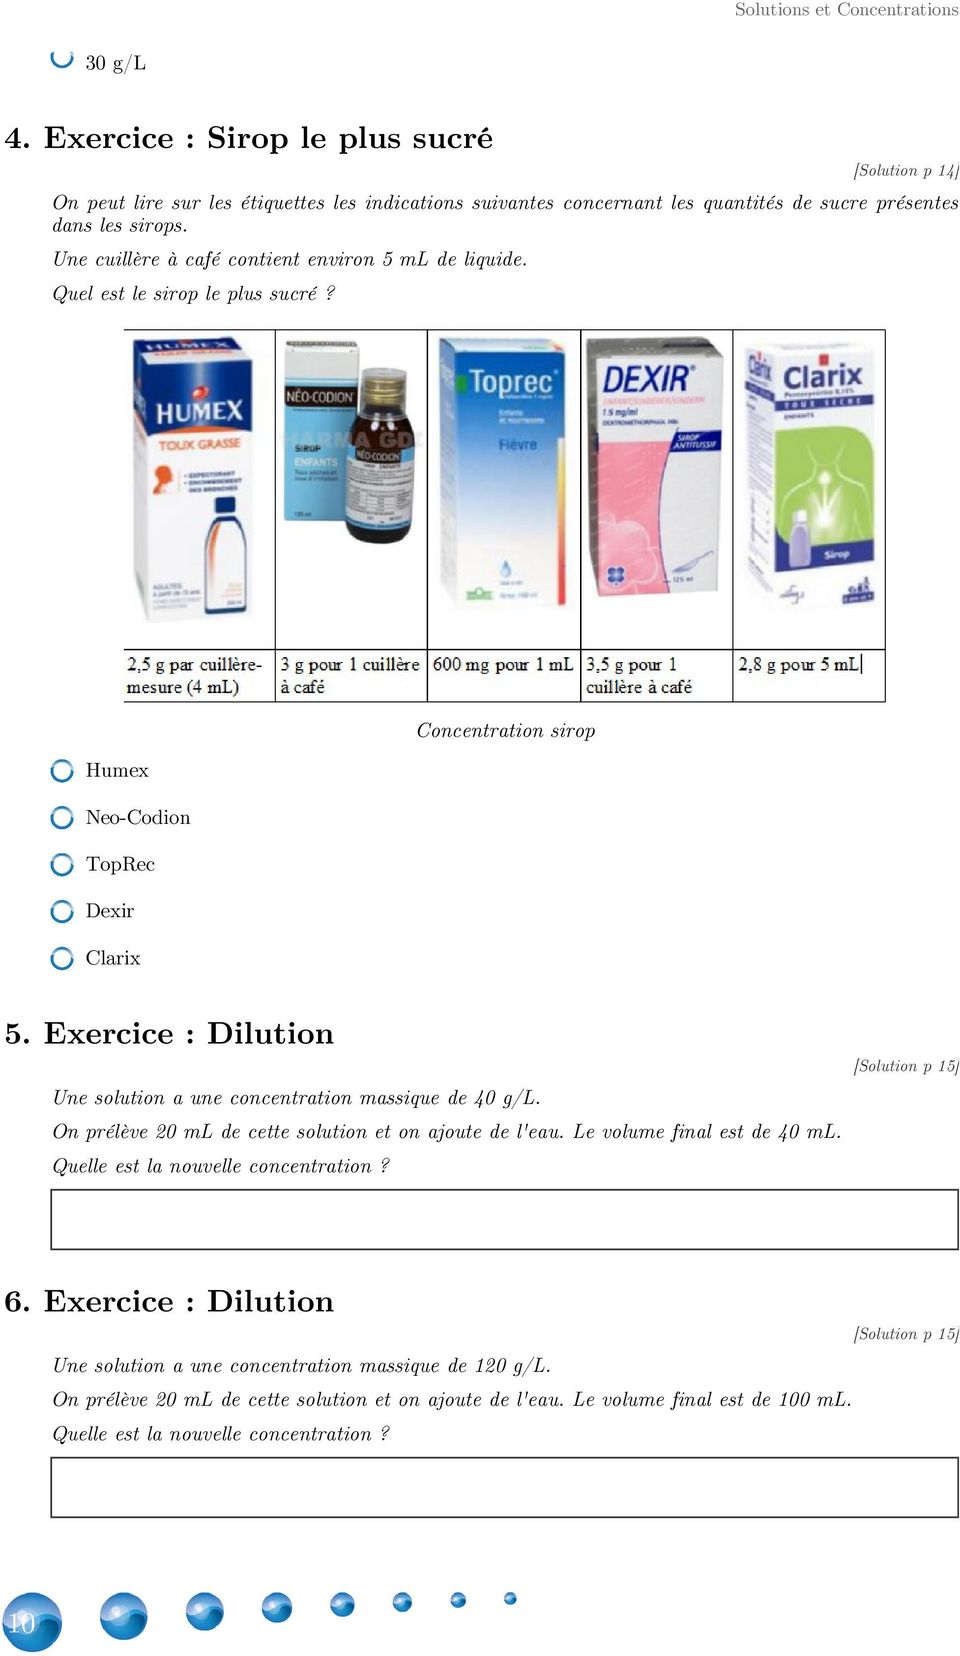 exercice dilution seconde